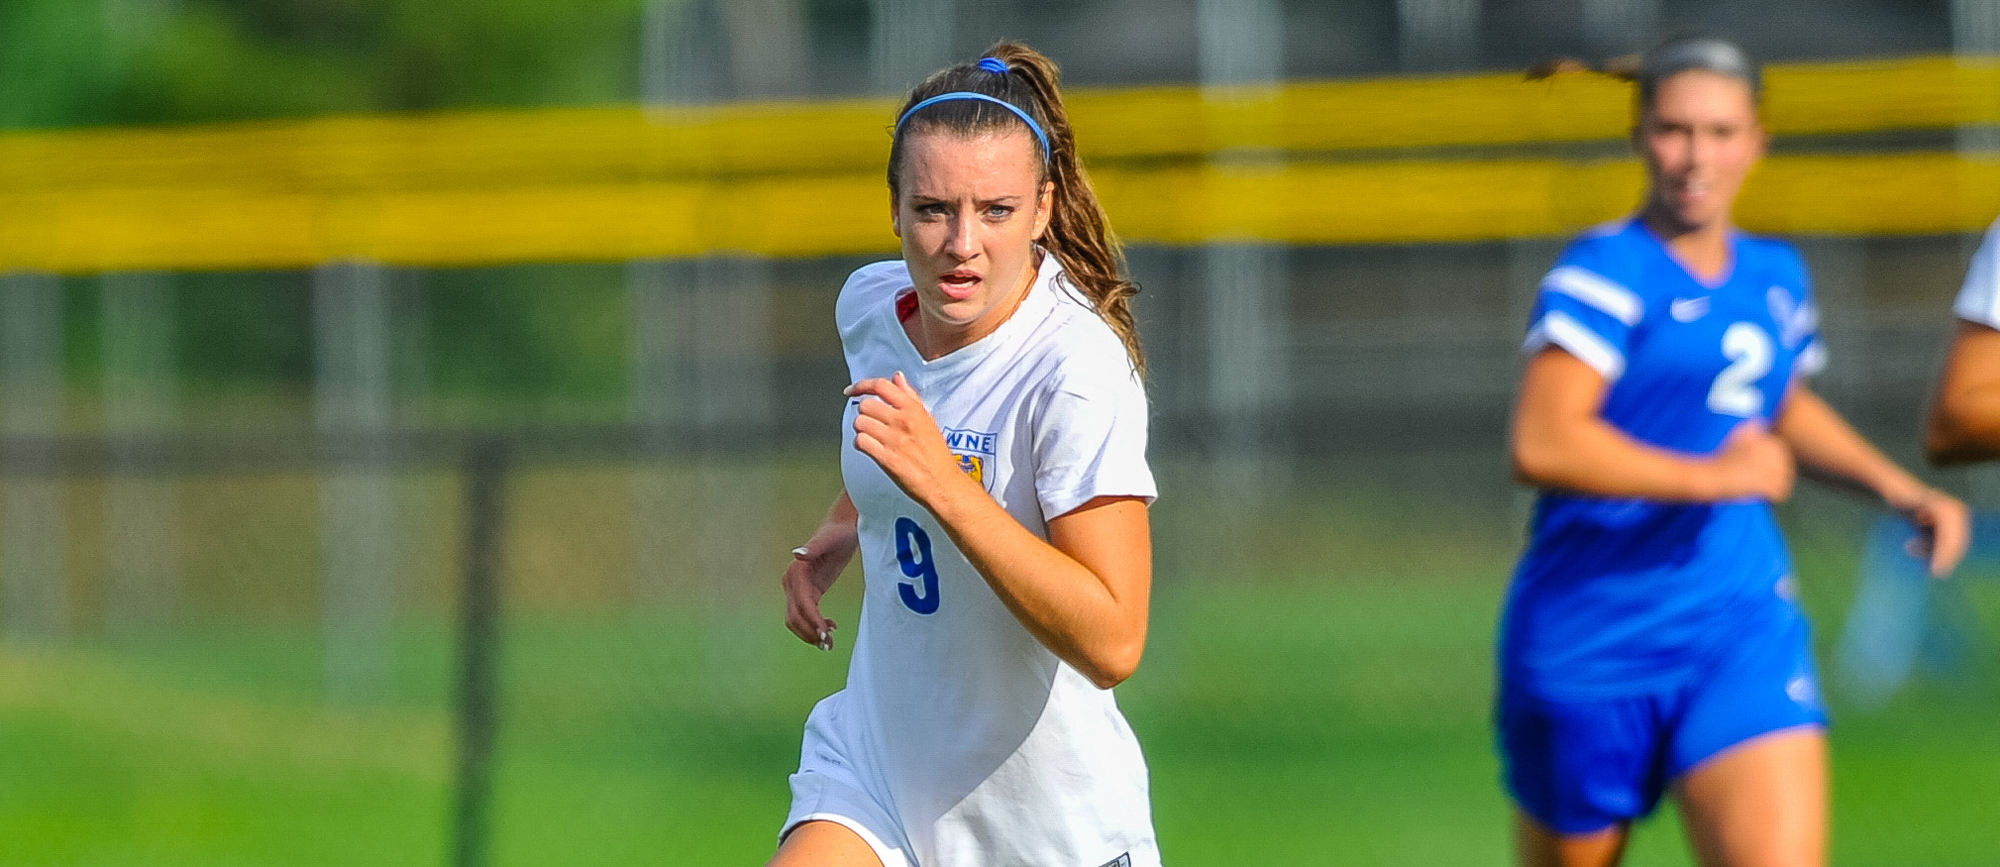 Western New England Blanked by Wentworth in CCC Quarterfinals, 3-0